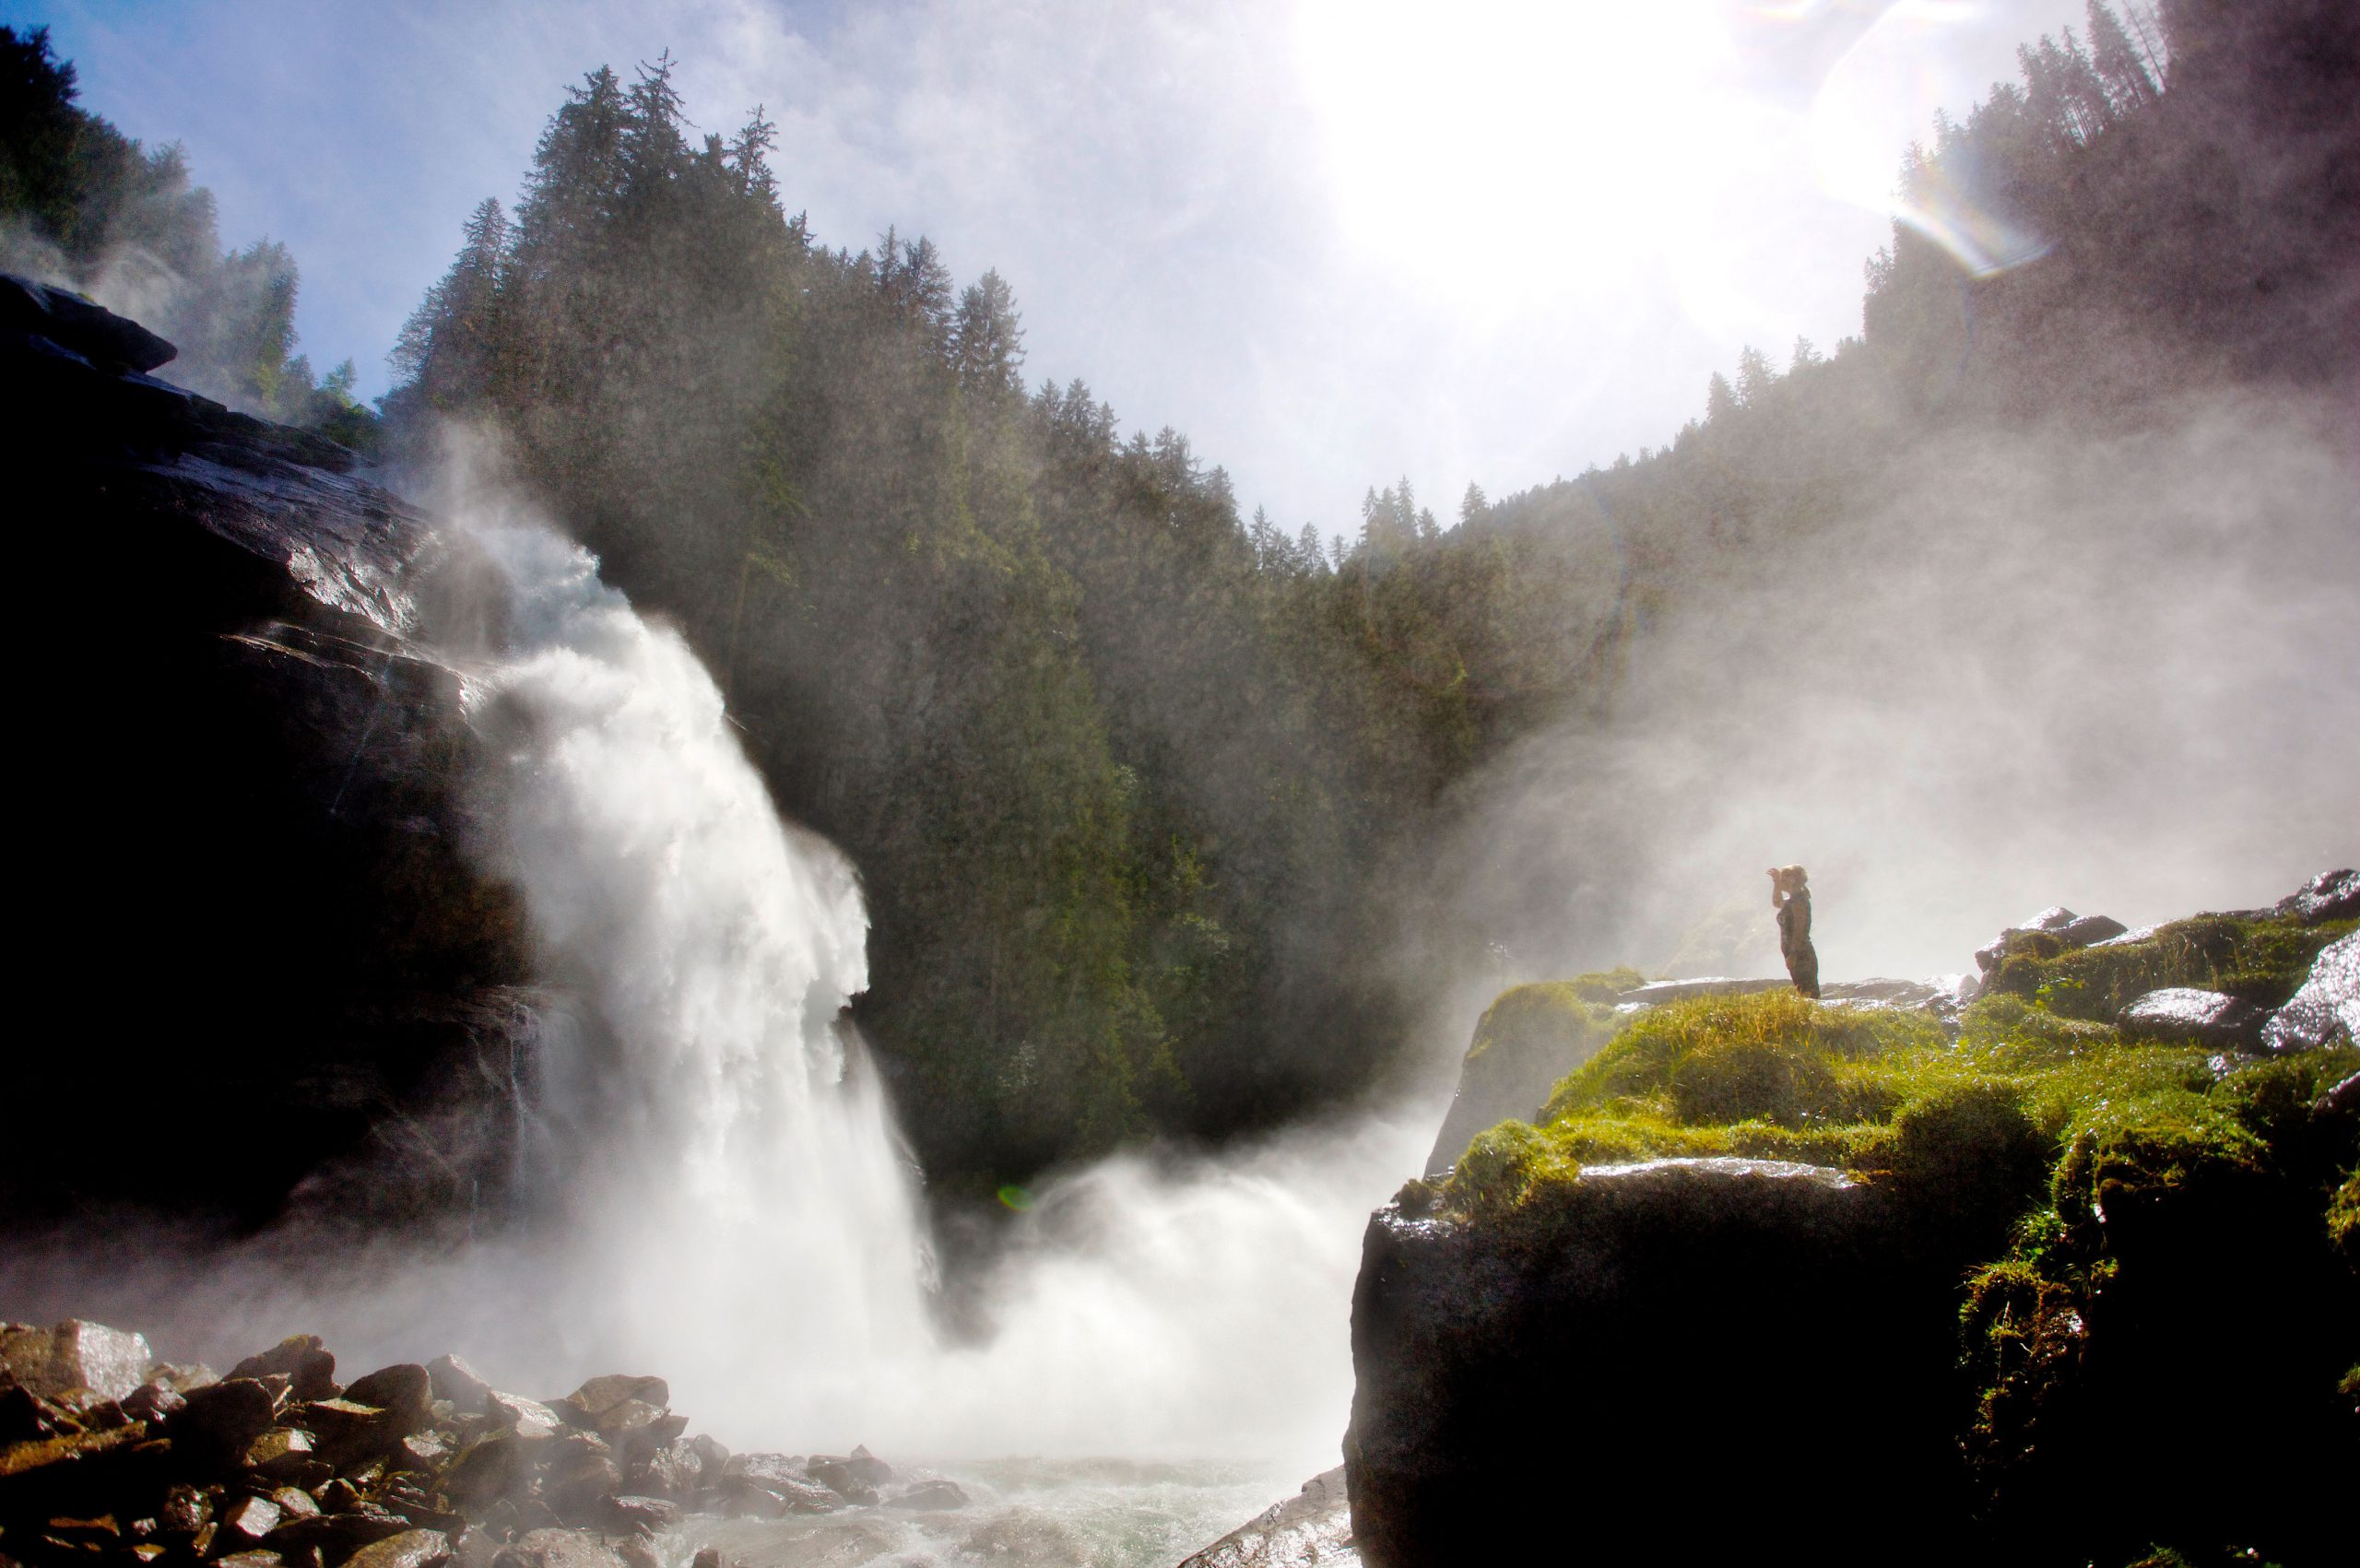 the Krimml waterfalls in the Hohe Tauern National Park are worth a visit